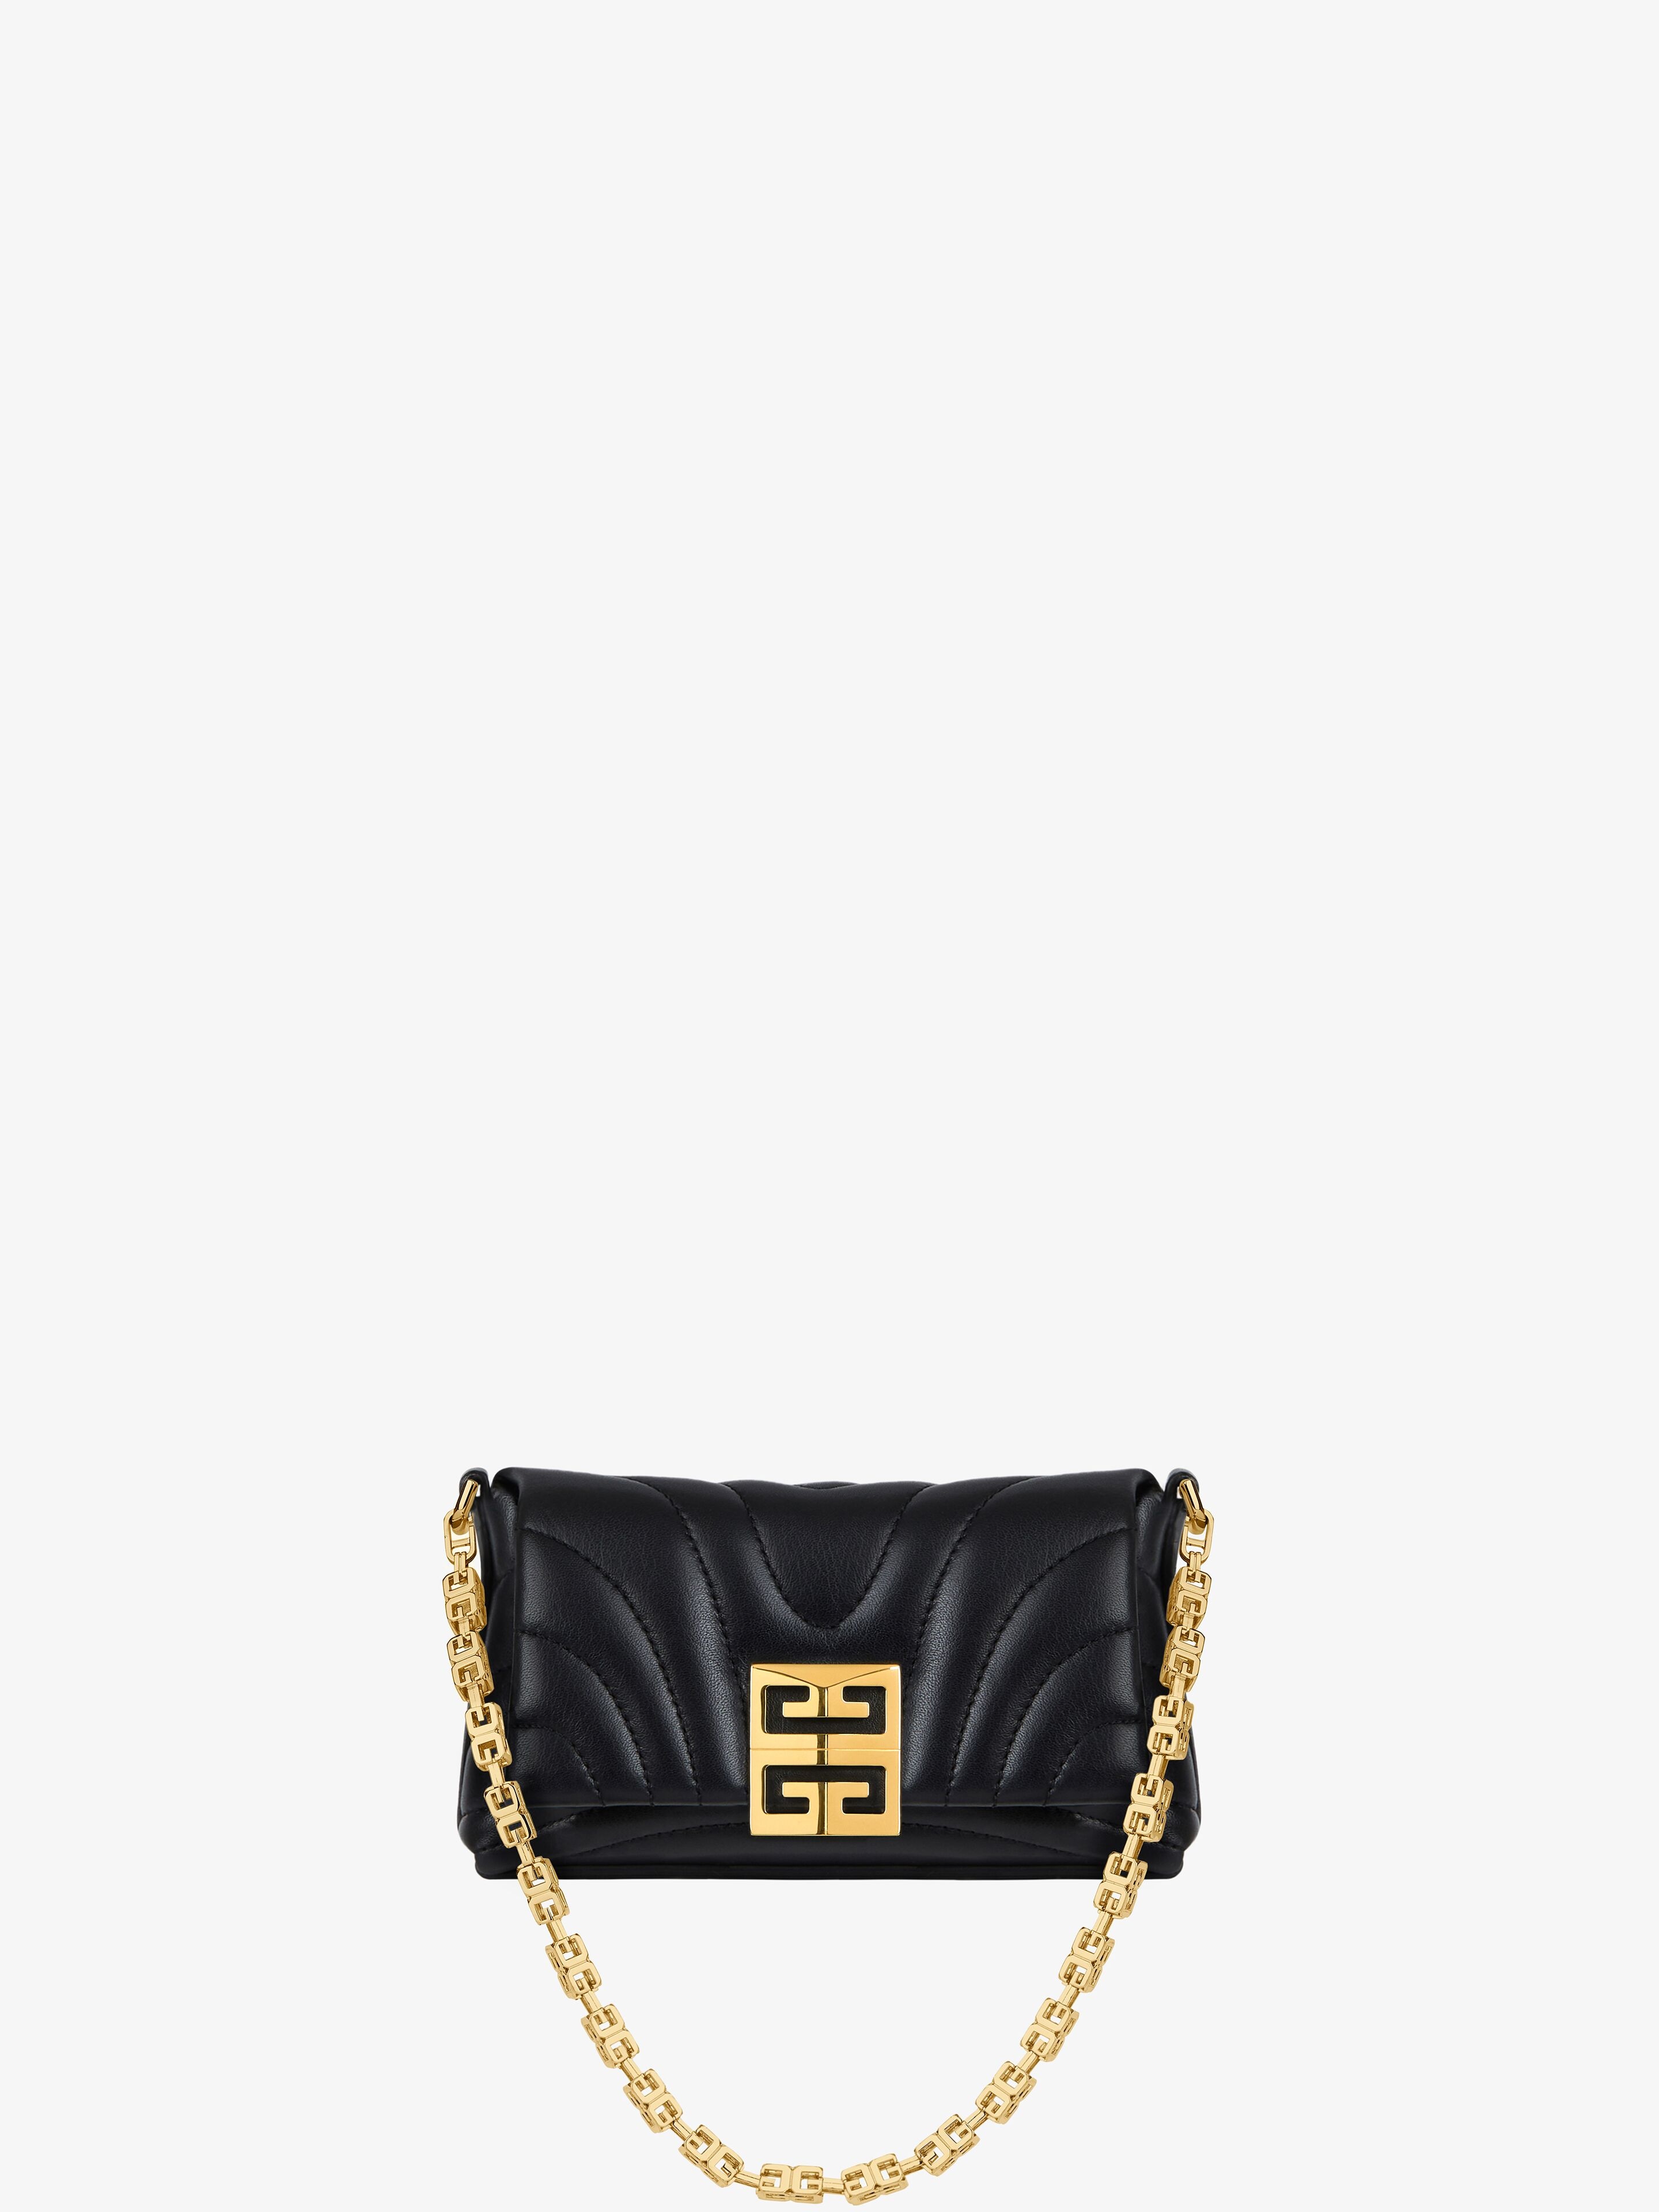 GIVENCHY MICRO 4G SOFT BAG IN QUILTED LEATHER